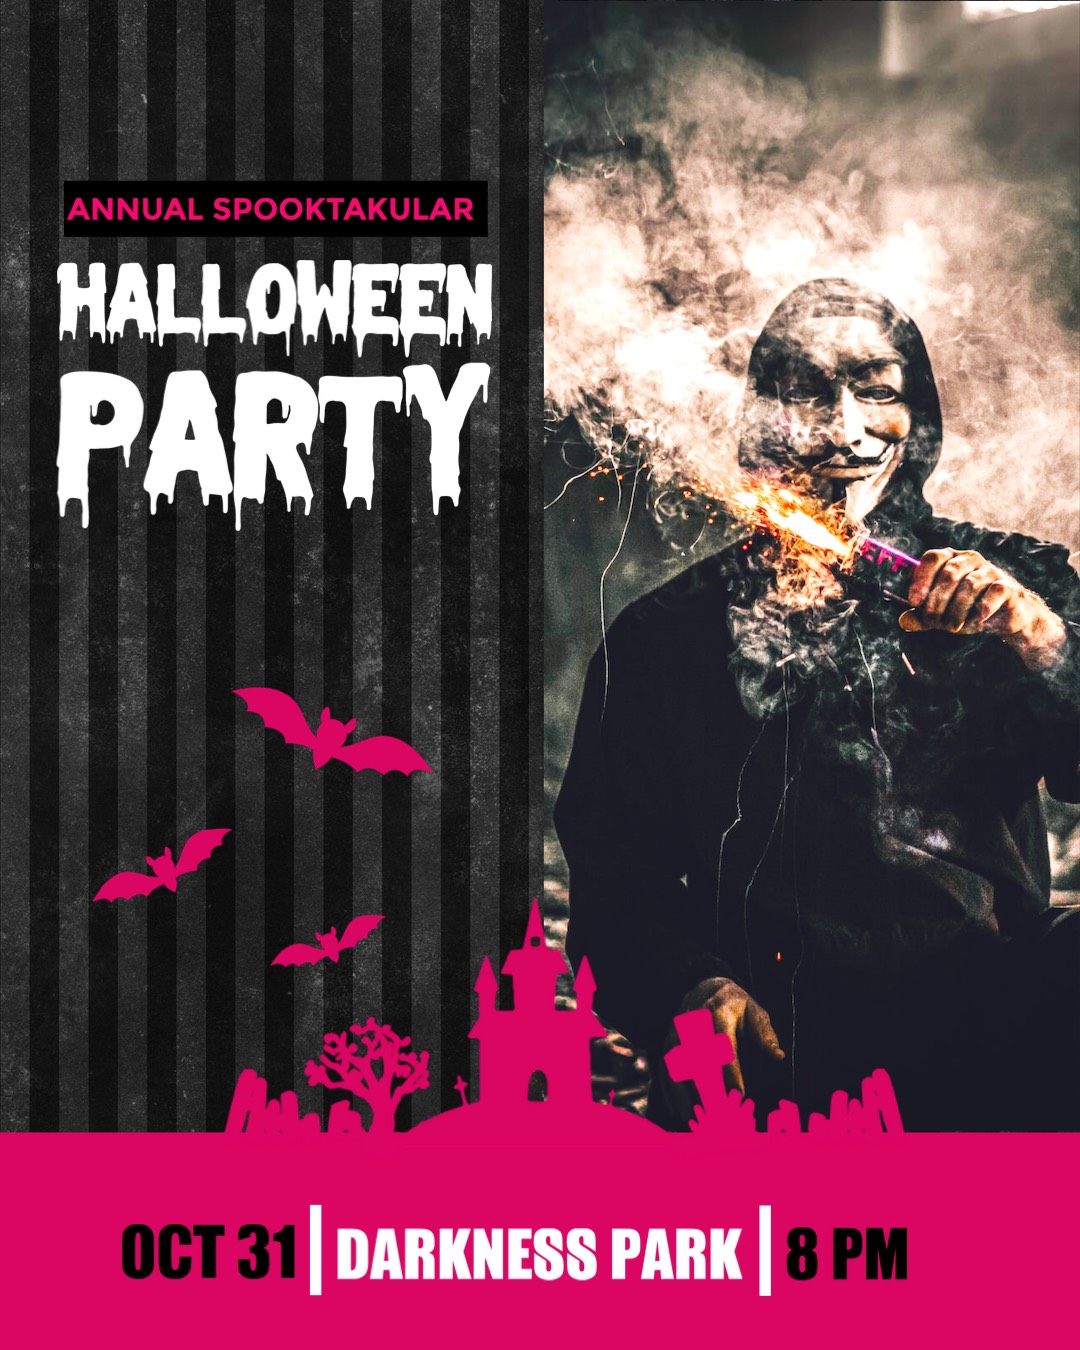 A Flyer For A Halloween Party With A Man Smoking A Cigarette Halloween Template